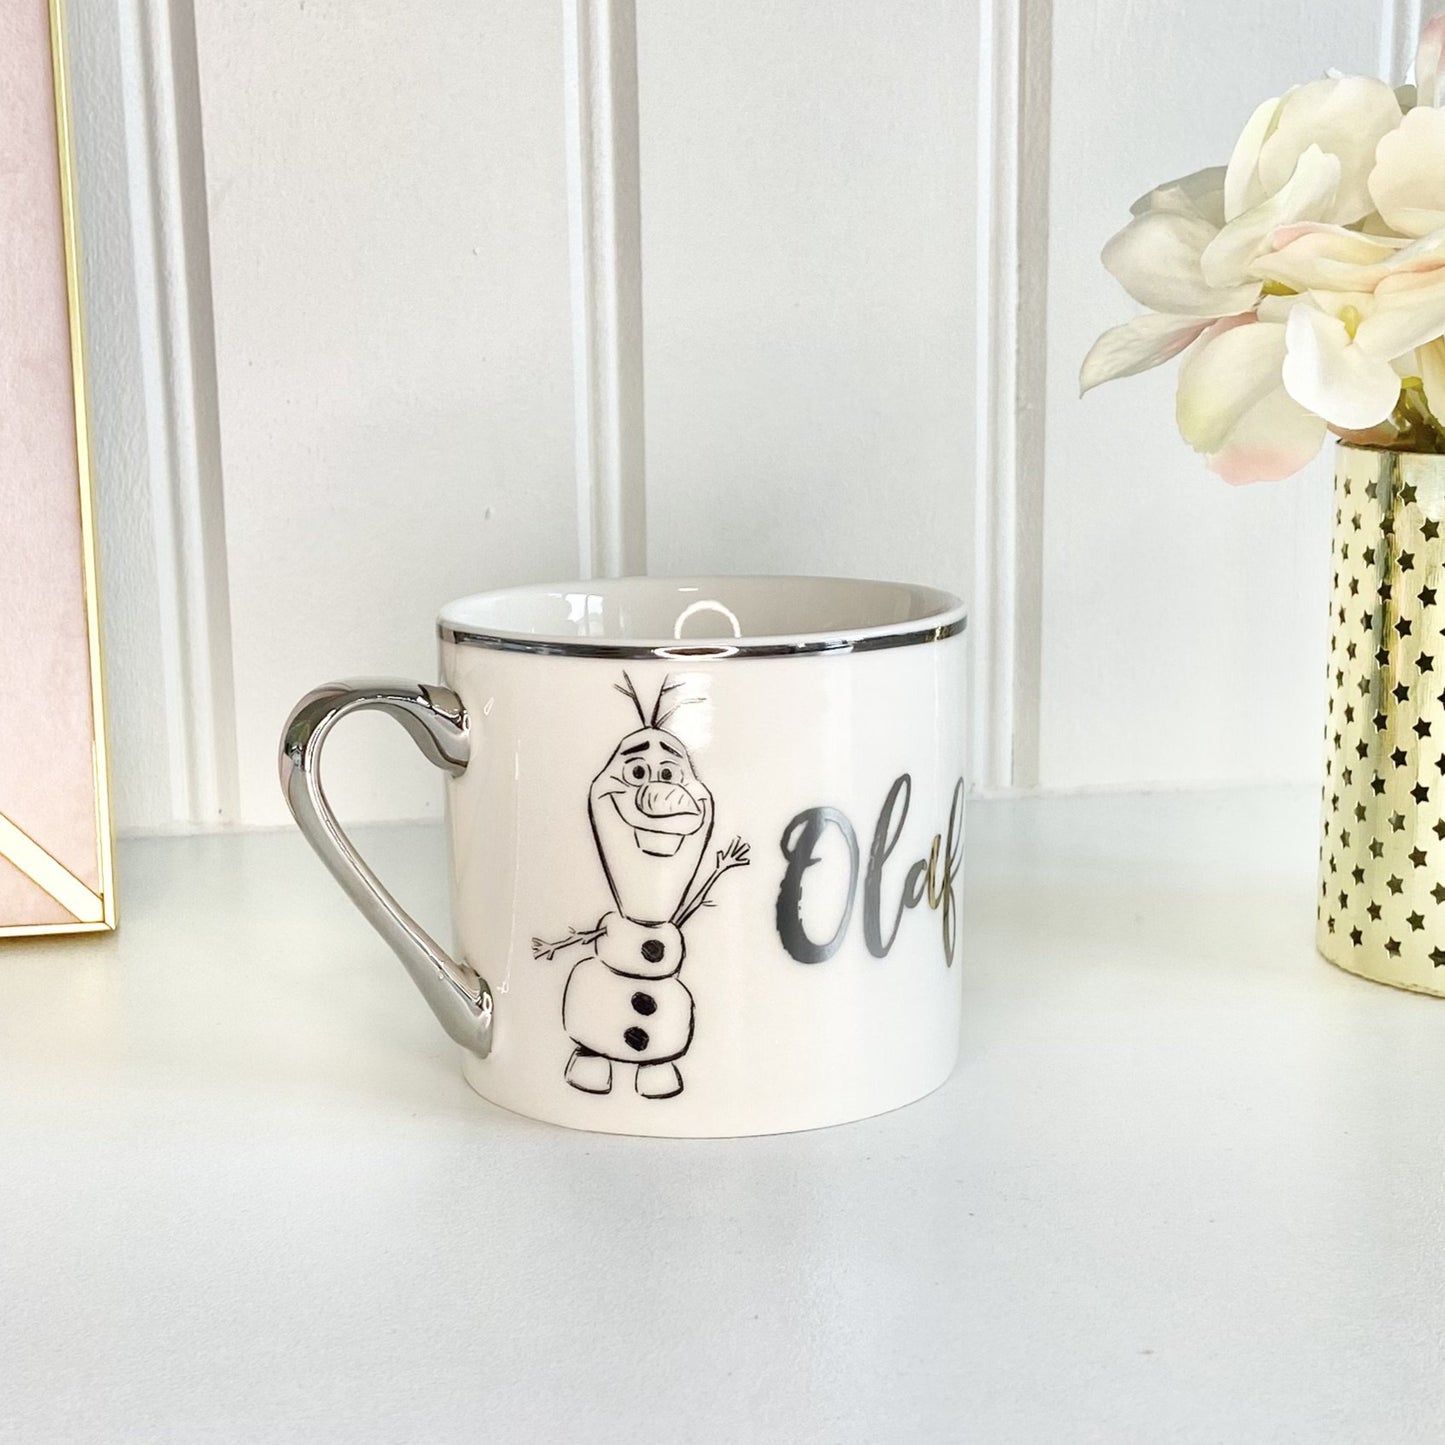 Frozen Olaf Disney Classic Collectable Mug with Gift Box - Penny Rose Home and Gifts